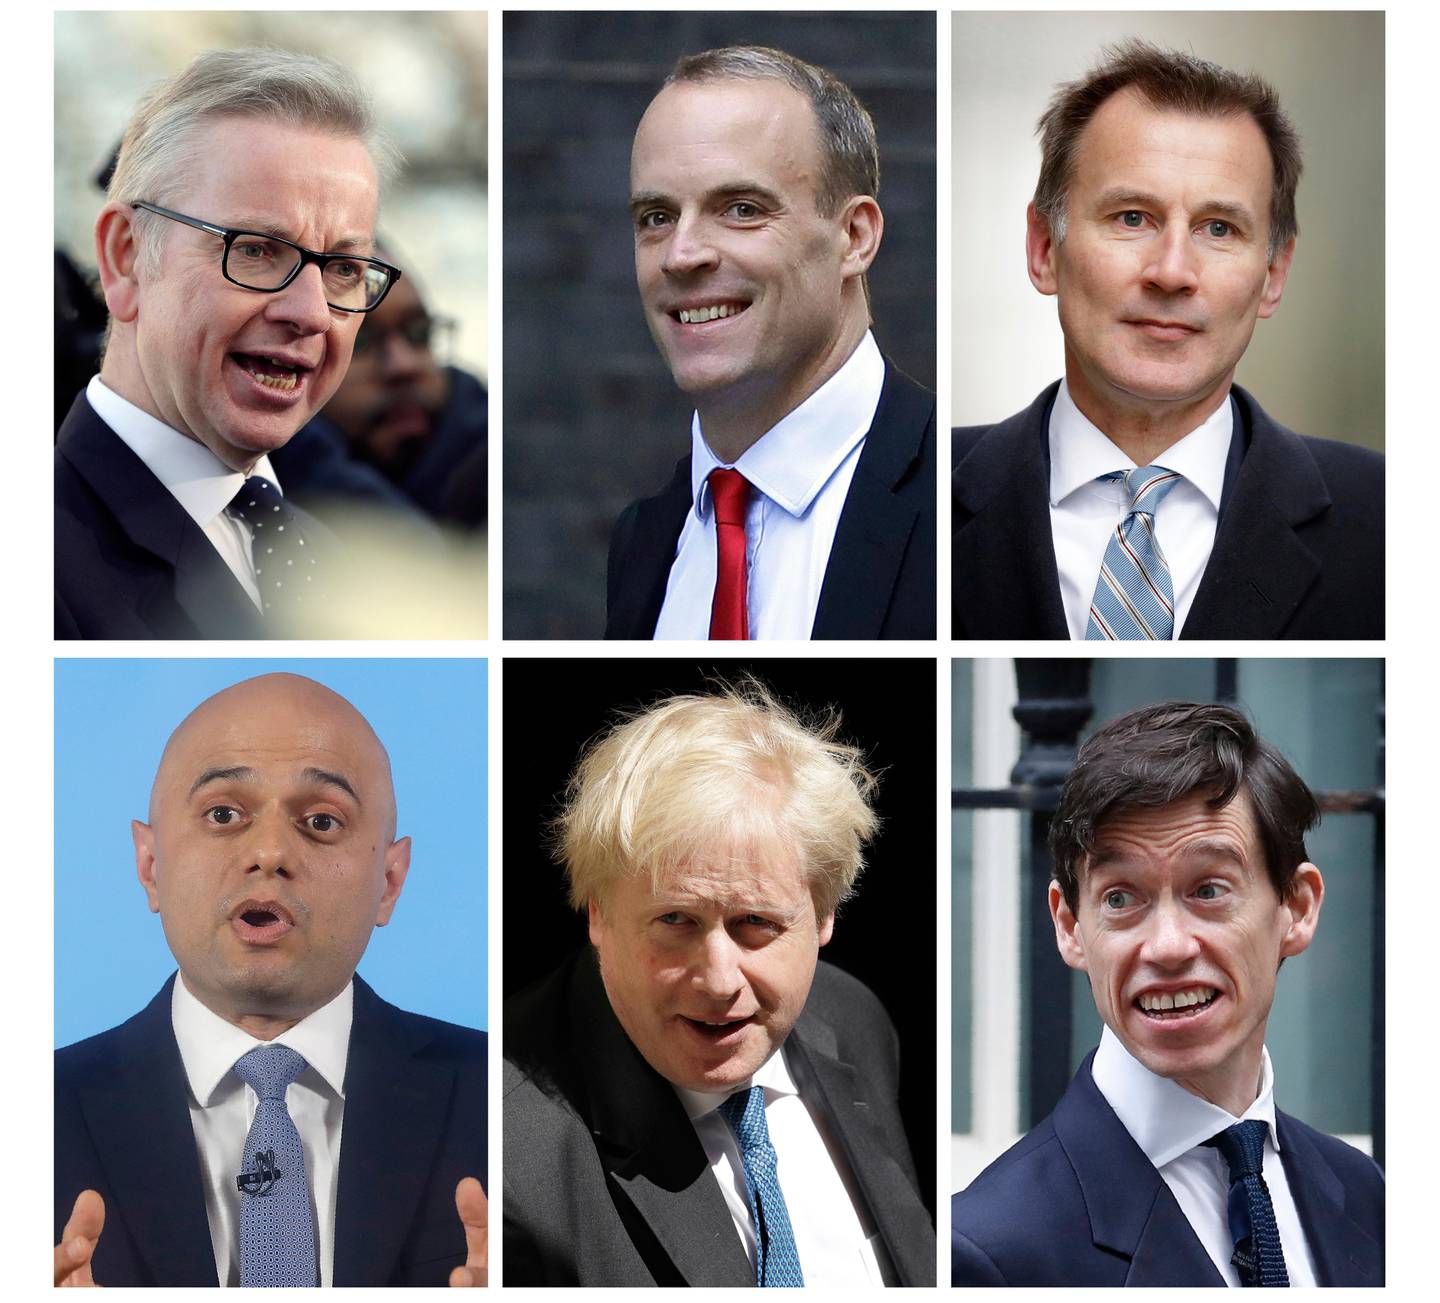 This combination photo made up of file photos, shows the remaining six contenders in the Conservative Party leadership race Friday June 14, 2019. Top from left: Michael Gove, Dominic Raab, Jeremy Hunt, and bottom from left: Sajid Javid, Boris Johnson, Rory Stewart.  Conservative Party legislators will hold more elimination votes next week, with the final two contenders put to a vote of 160,000 Conservative Party members nationwide and the winner will become Conservative leader and prime minister. (AP FILE Photo)